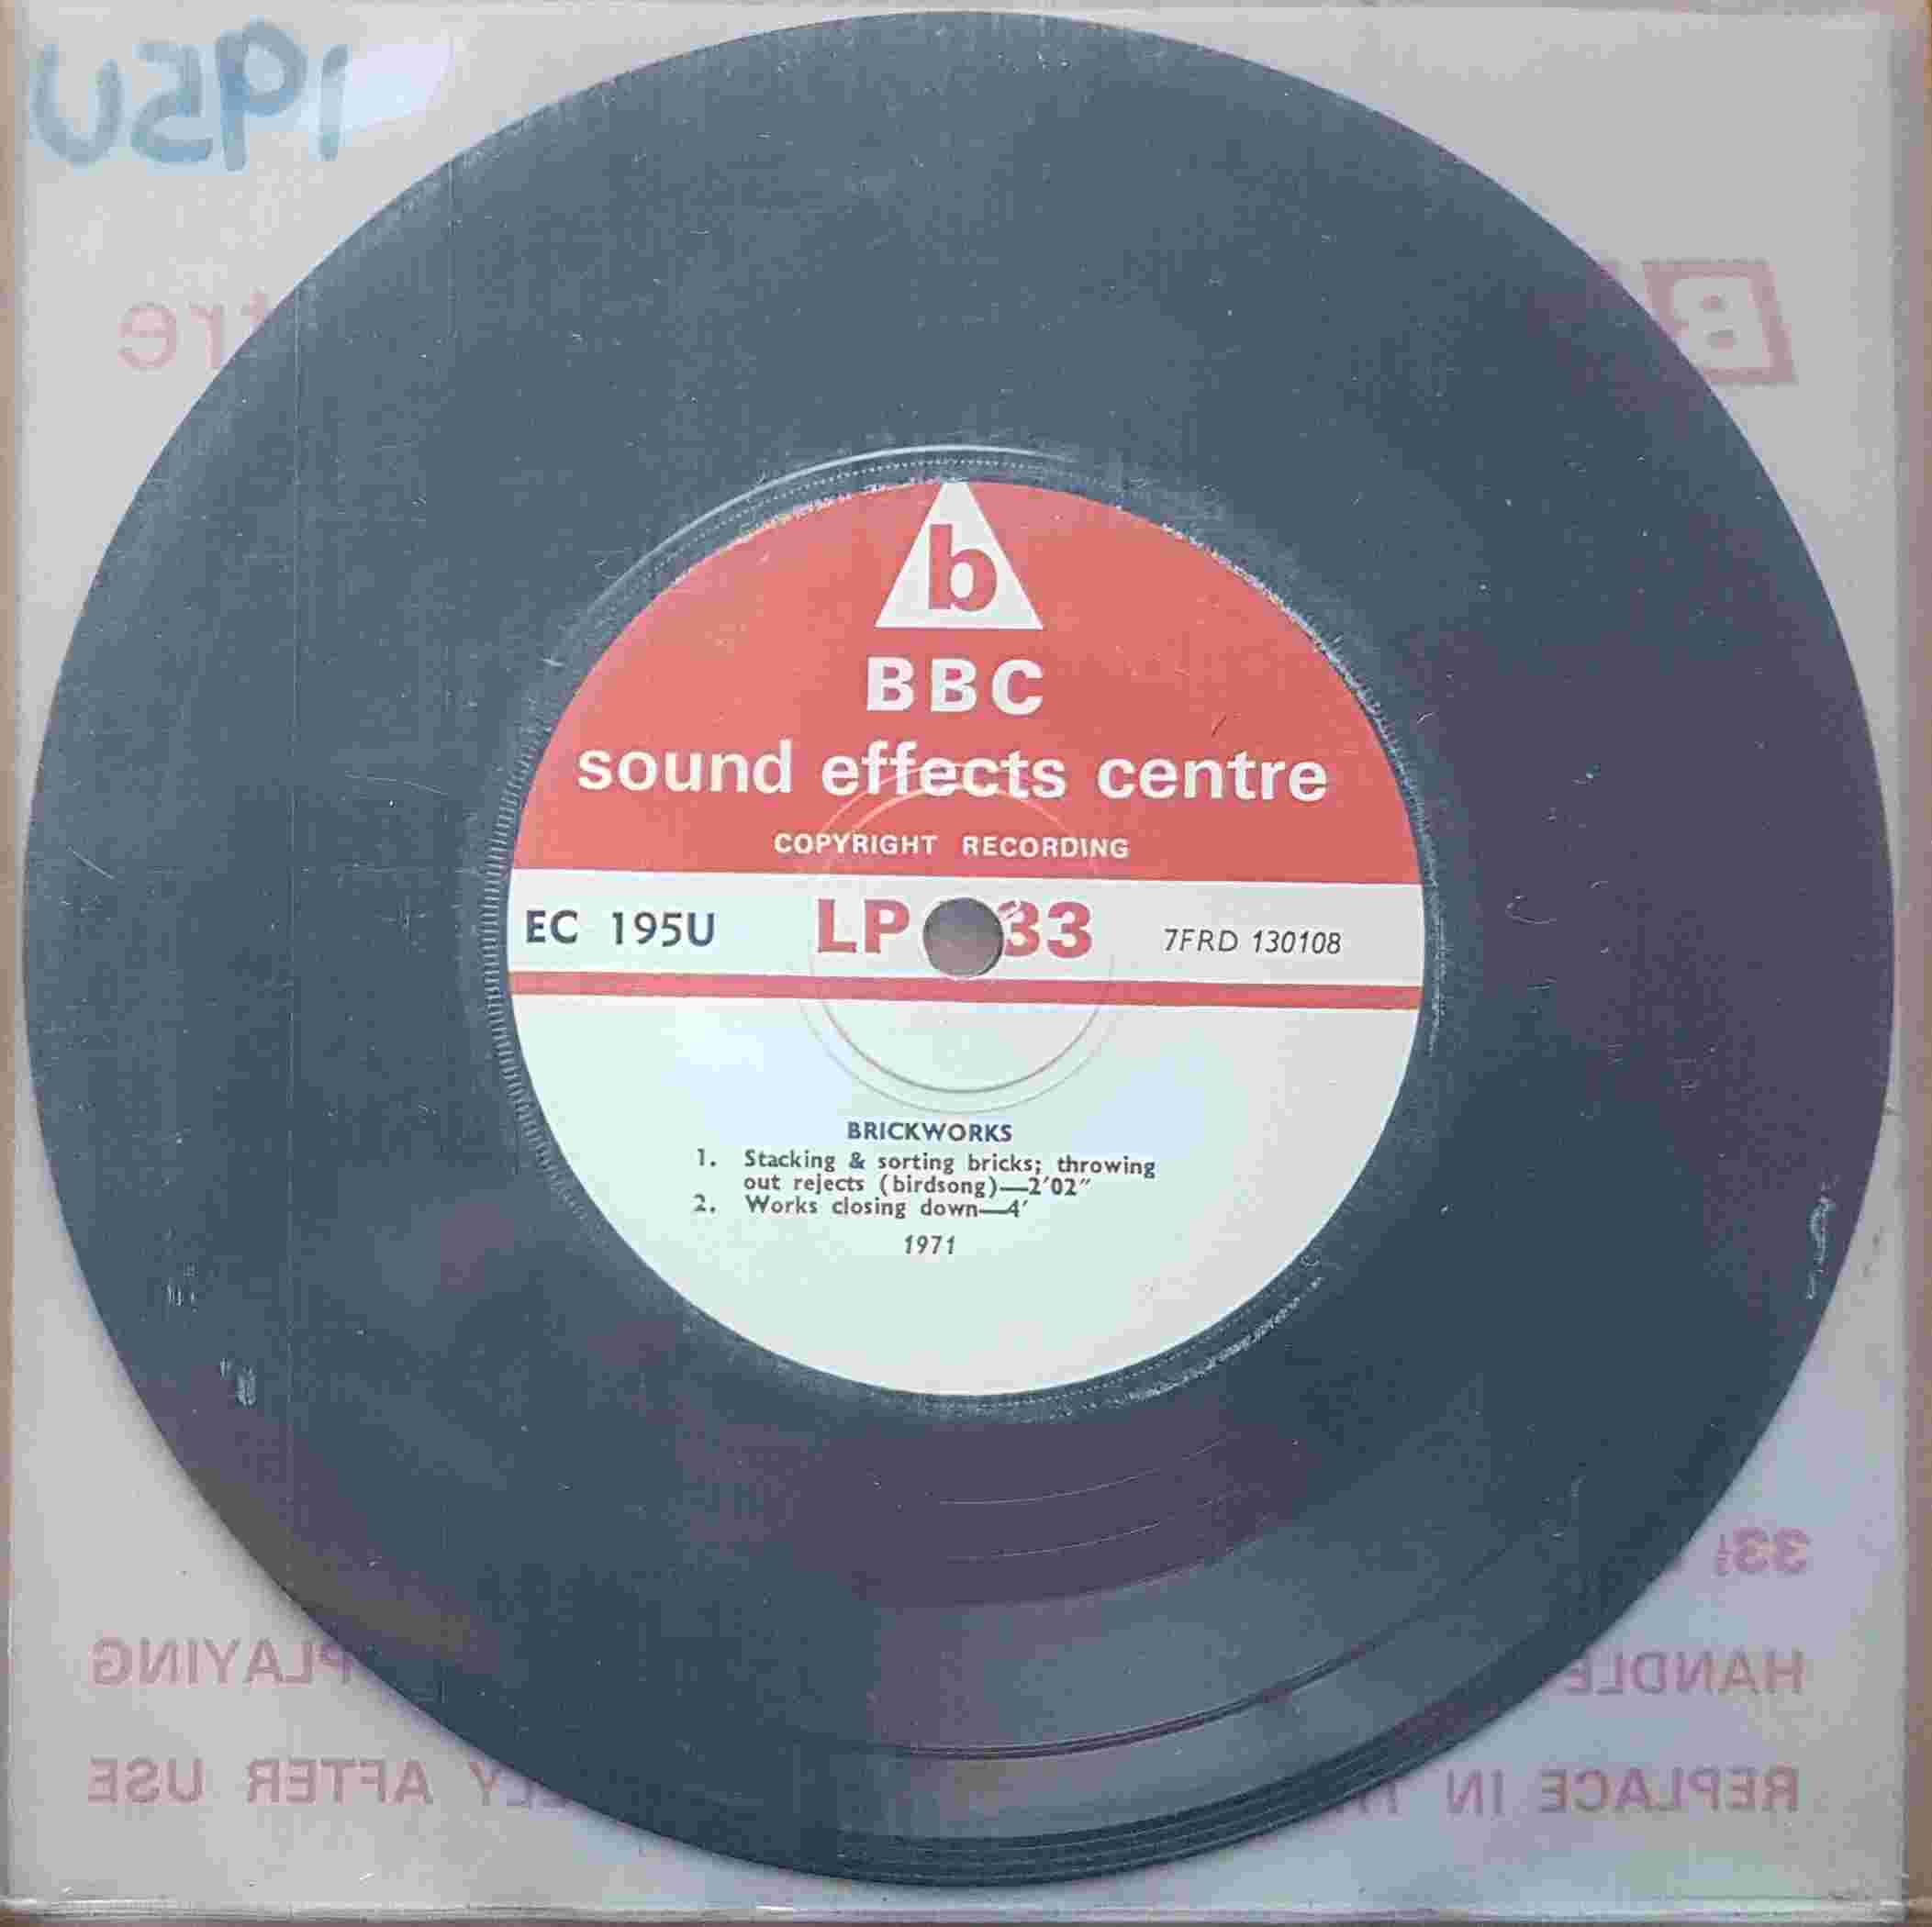 Picture of EC 195U Brickworks by artist Not registered from the BBC records and Tapes library